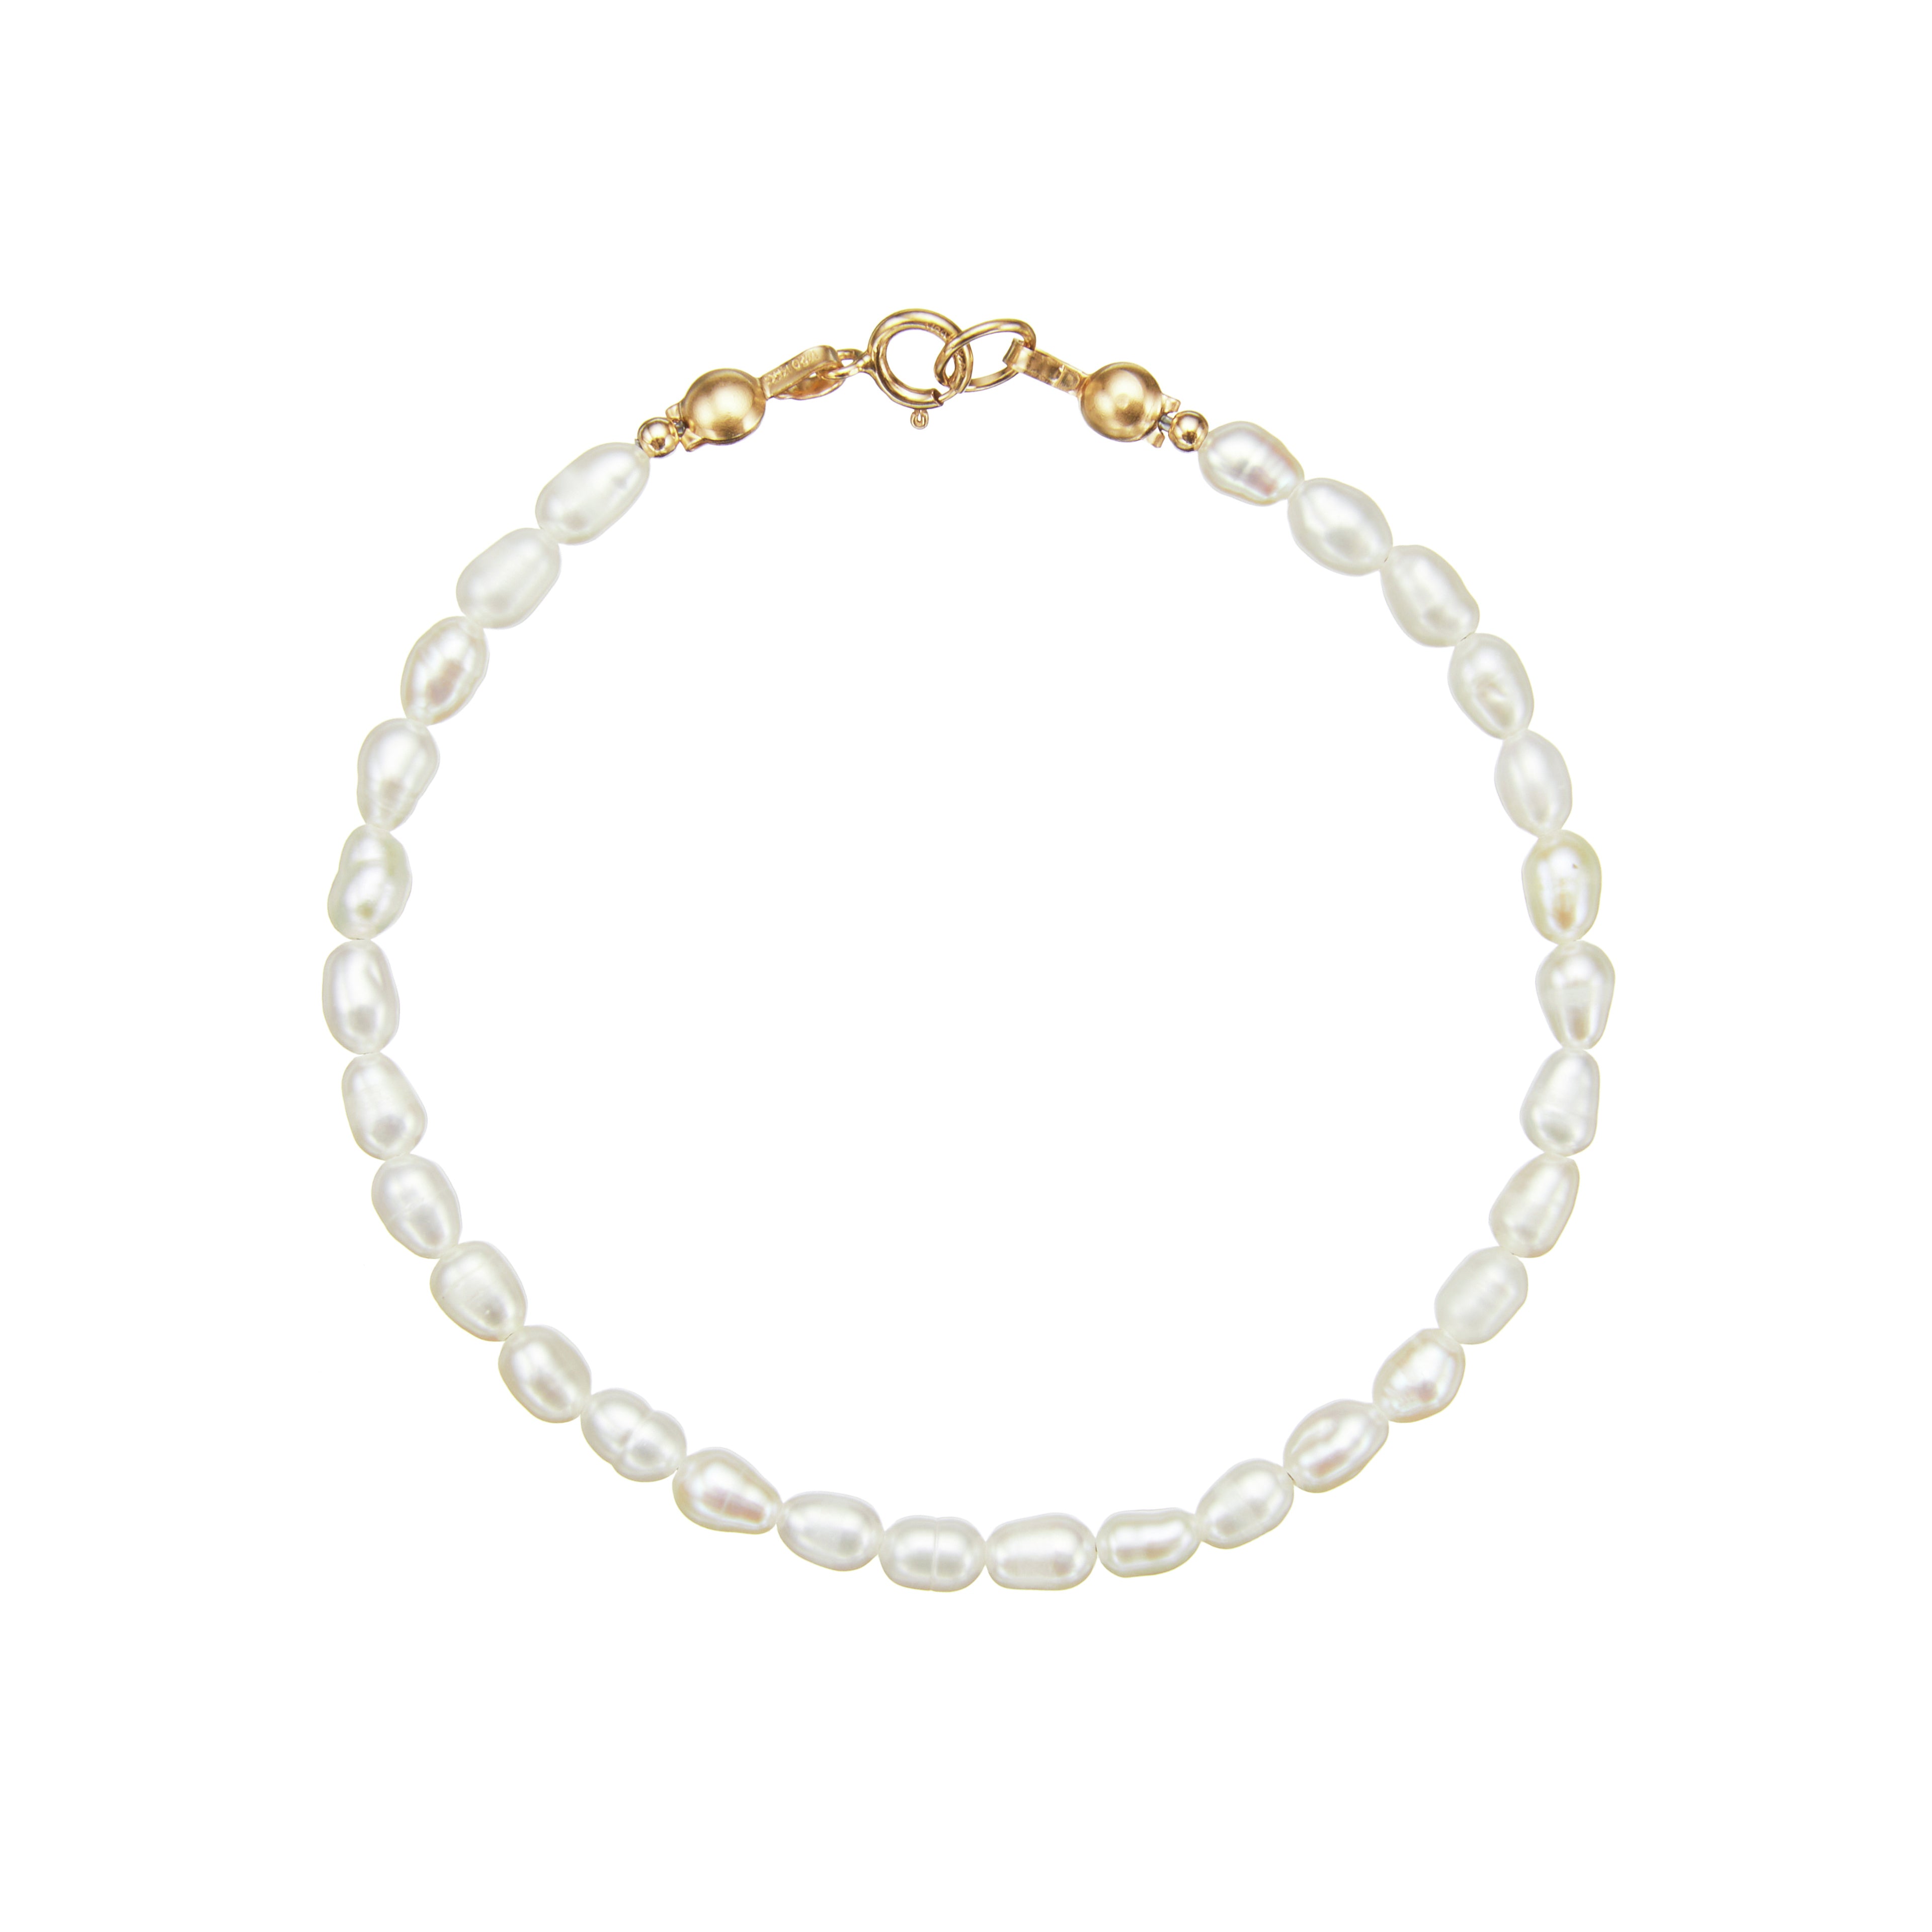 Gold seed pearl bracelet on a white background